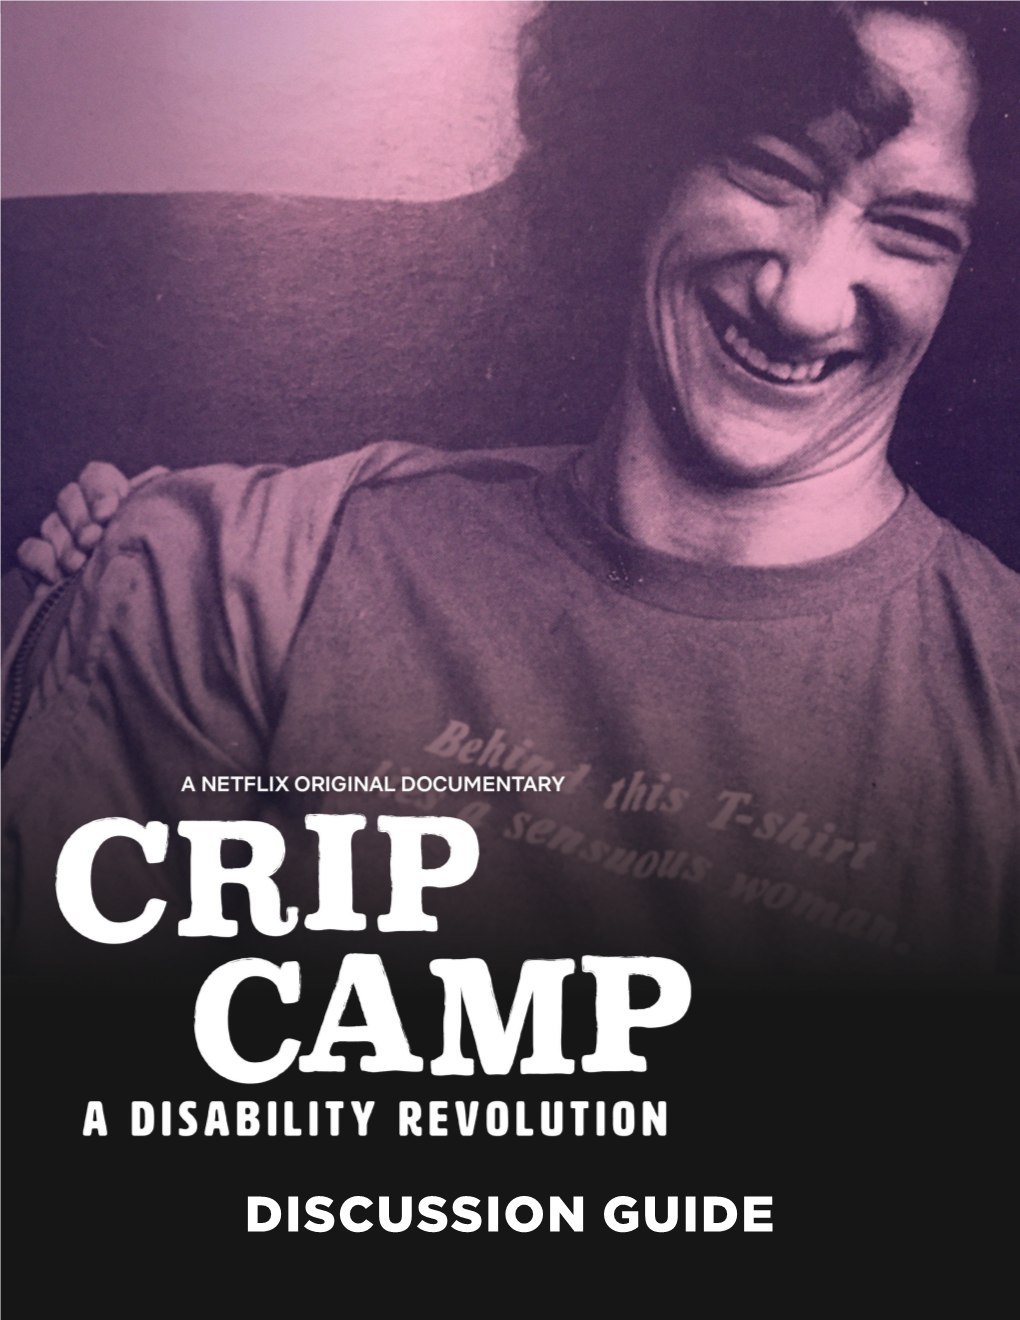 DISCUSSION GUIDE INTRODUCTION Welcome to the Crip Camp Discussion Guide